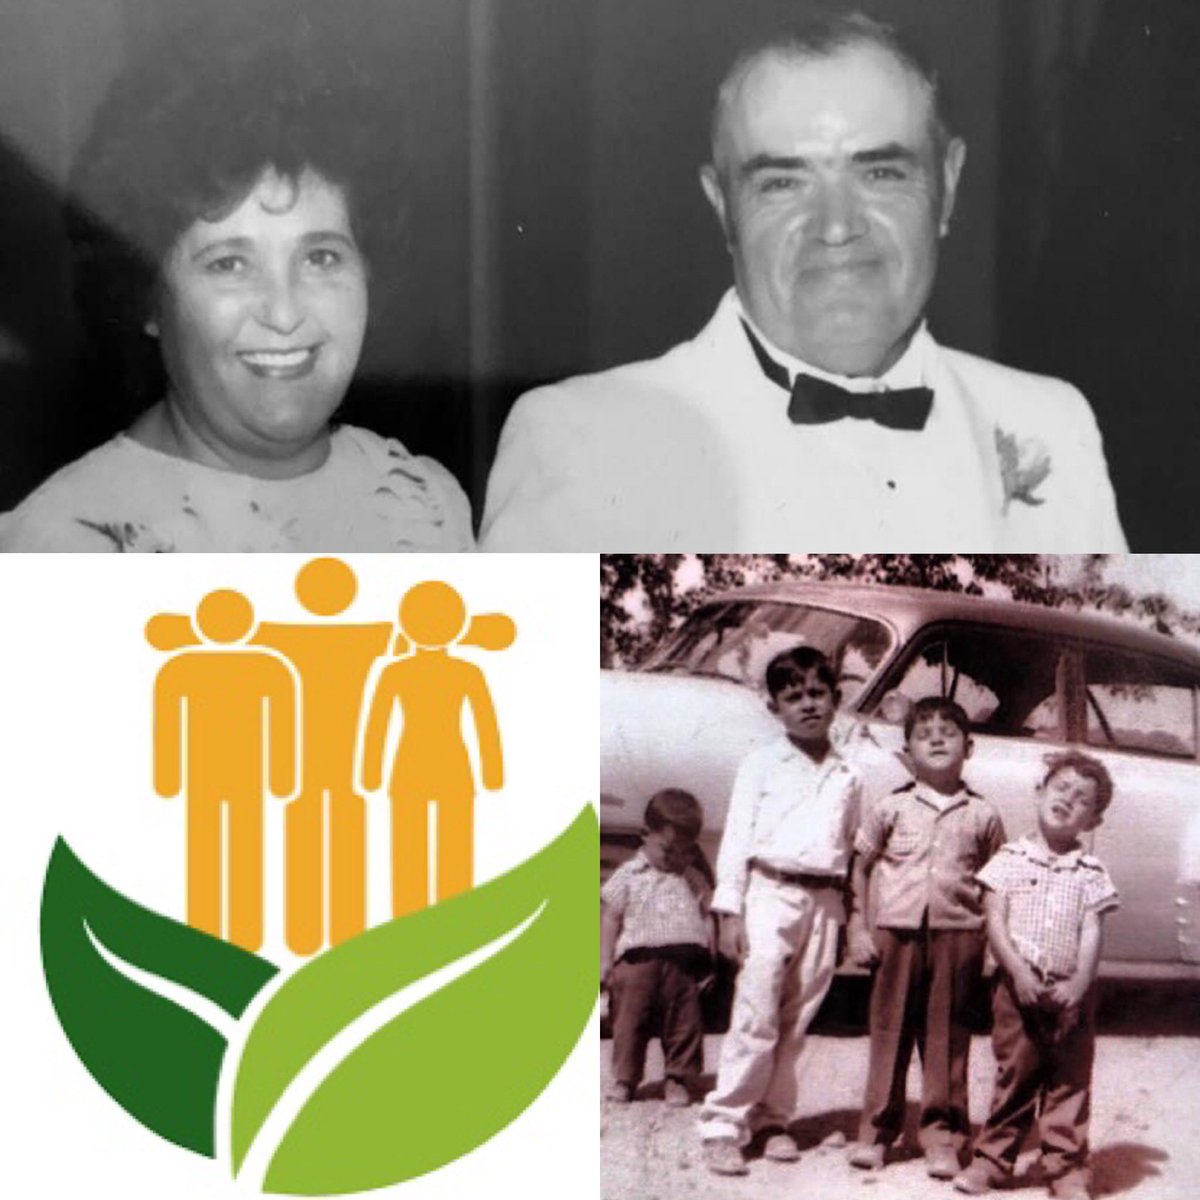 National Farmworker Awareness Week (March 25-31) is a welcome opportunity to show our appreciation for the people who feed us.  My parents Juvencio and Concepcion Velasquez were great human beings and inspirational farm workers. ❤️

#farmworkerjustice
#justiciacampesina